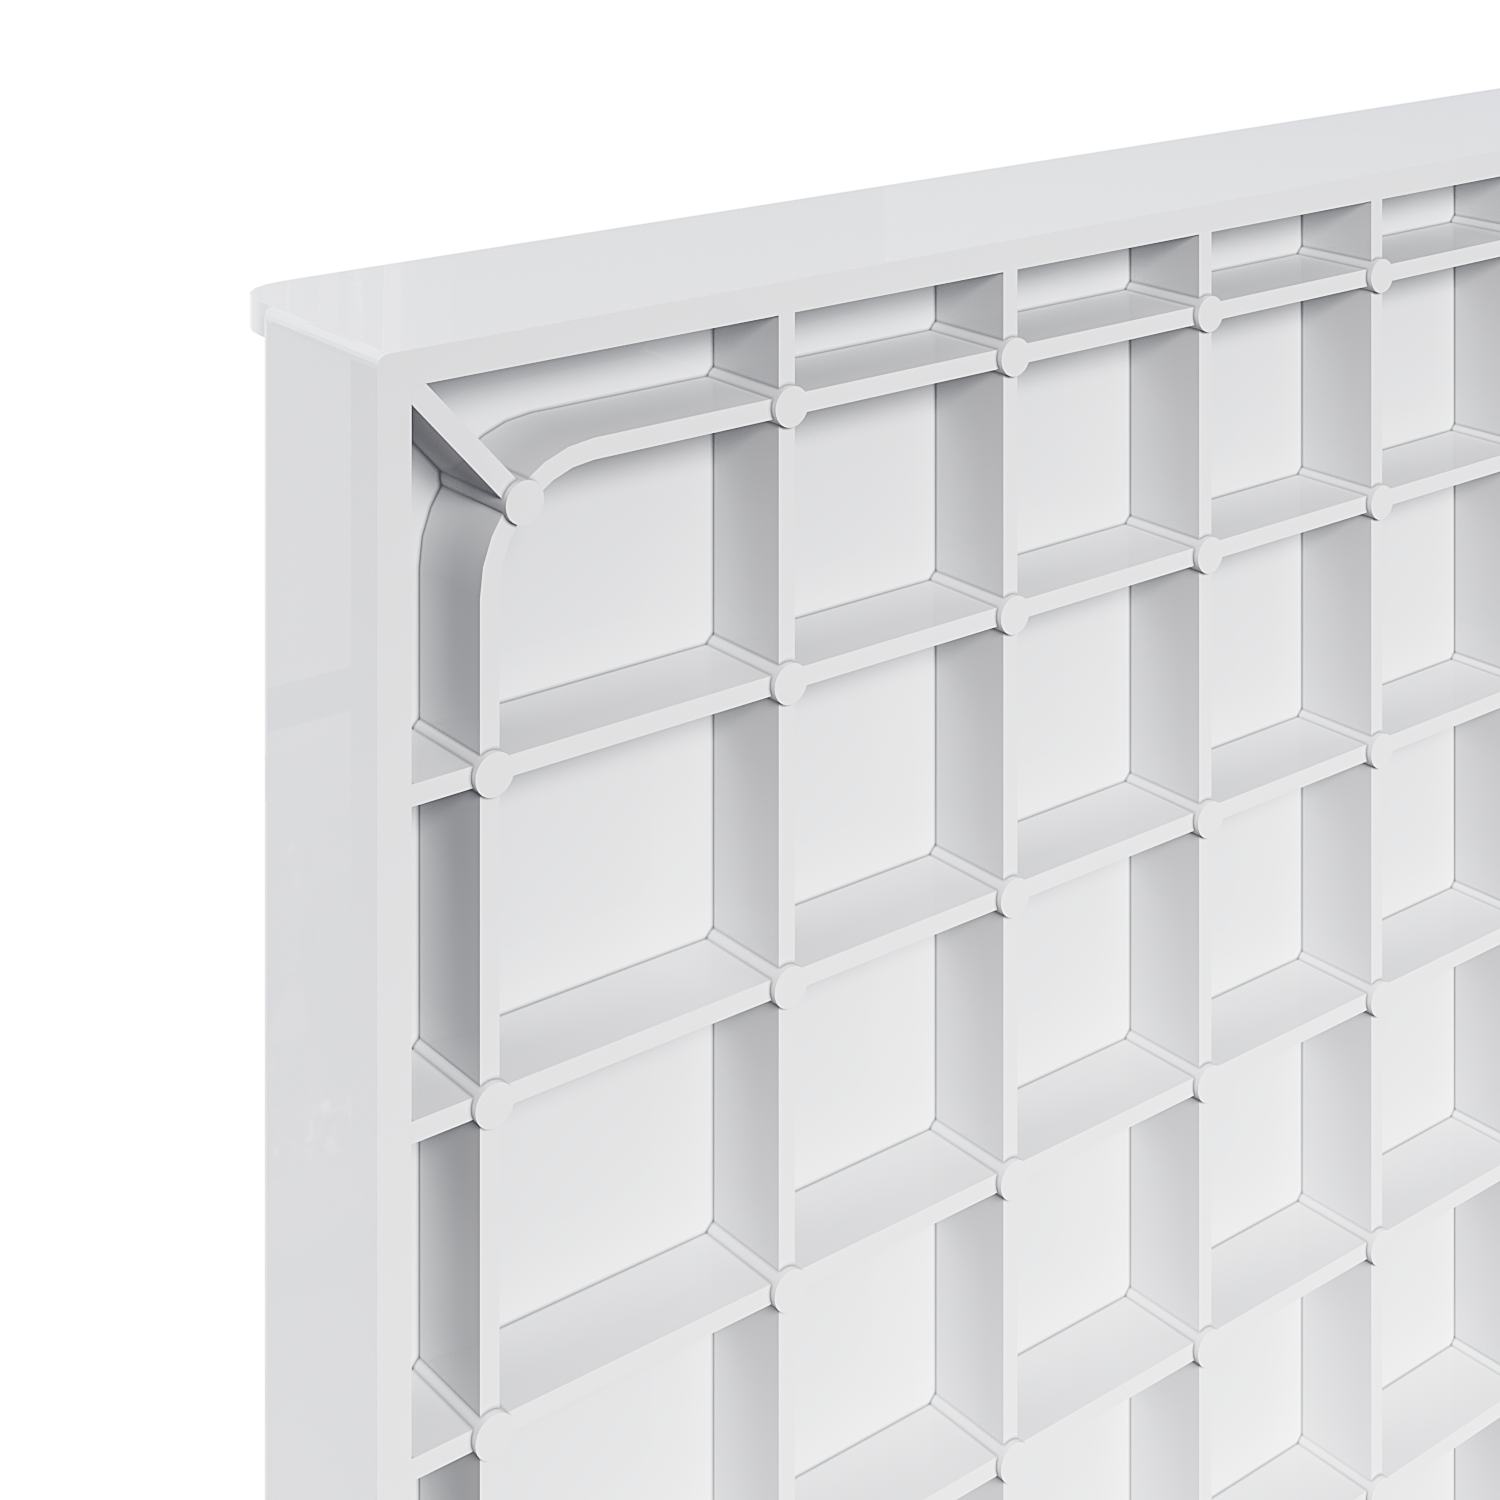 SL4U SMC Solid Shower Base for 60W'' x 32D'' Shower Enclosure, Center Shower Drain Included, 32"D x 60"W x 4"H Shower Tray Base, White.